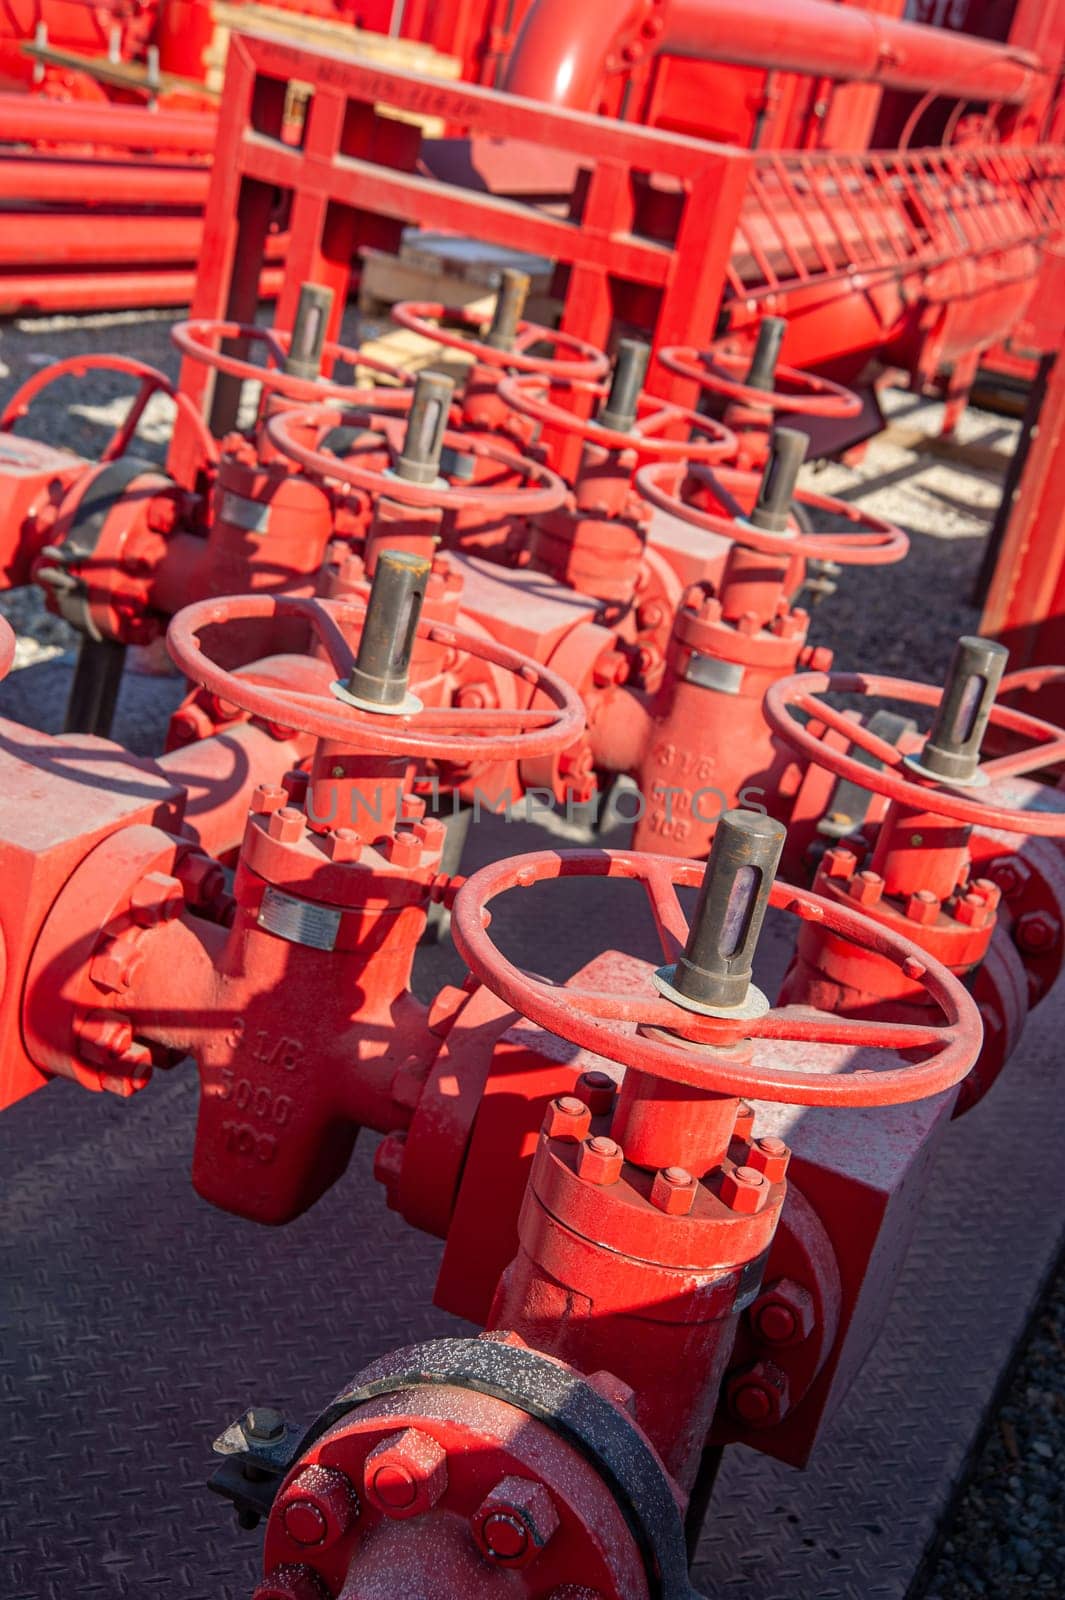 A closeup of a red industrial oil pipeline valves